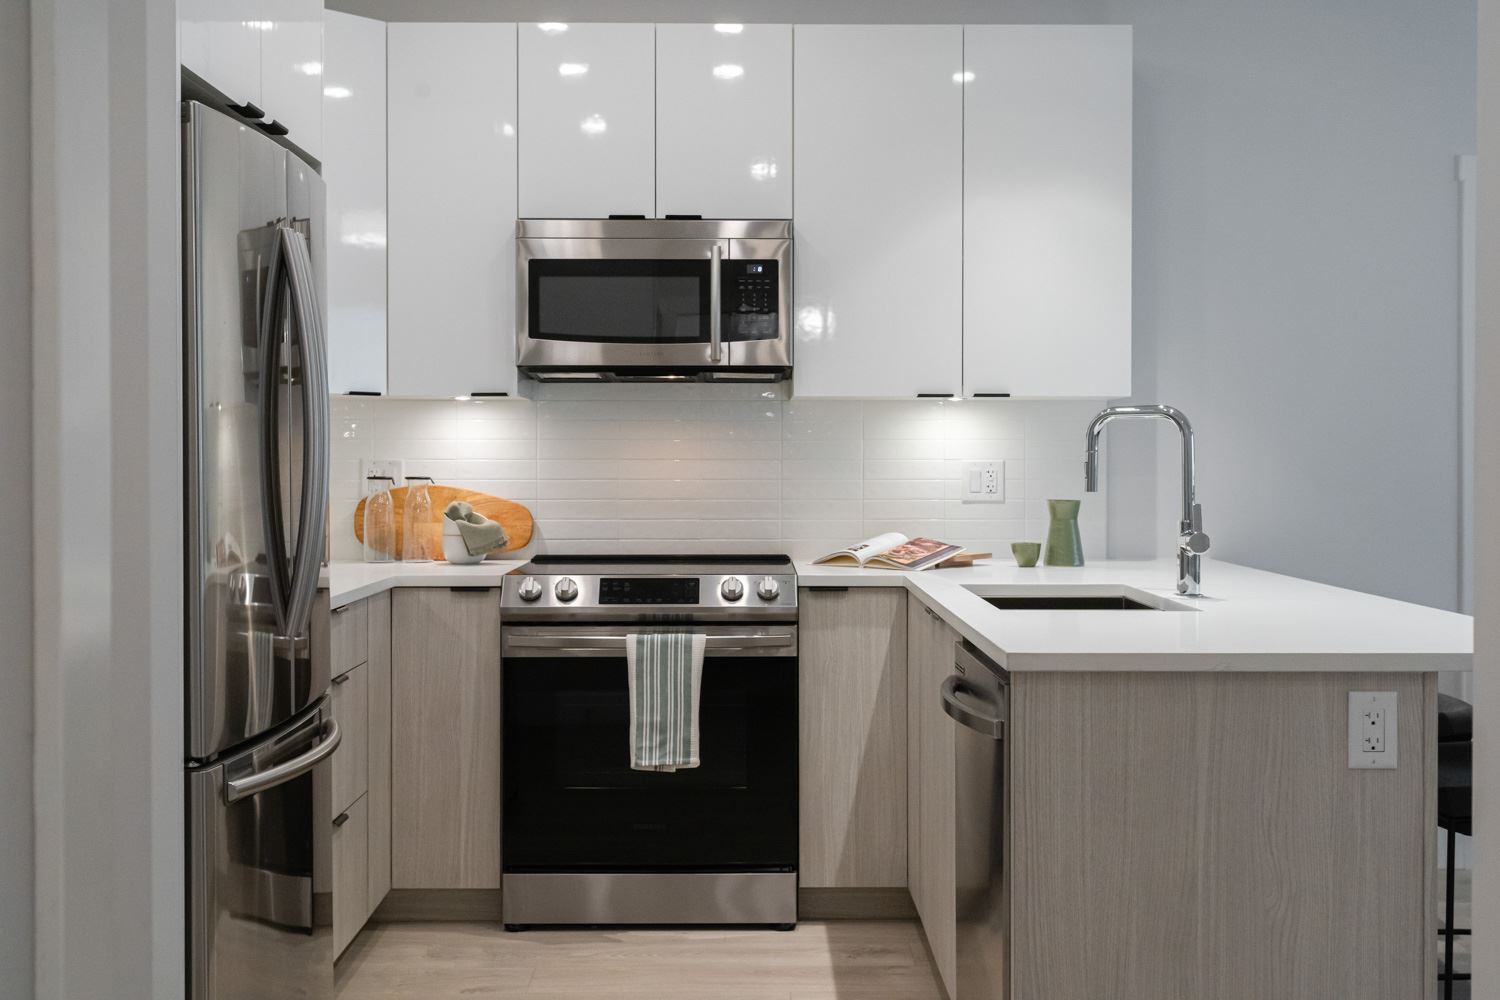 Equipped with ultra-quiet appliances and quartz stone countertops.